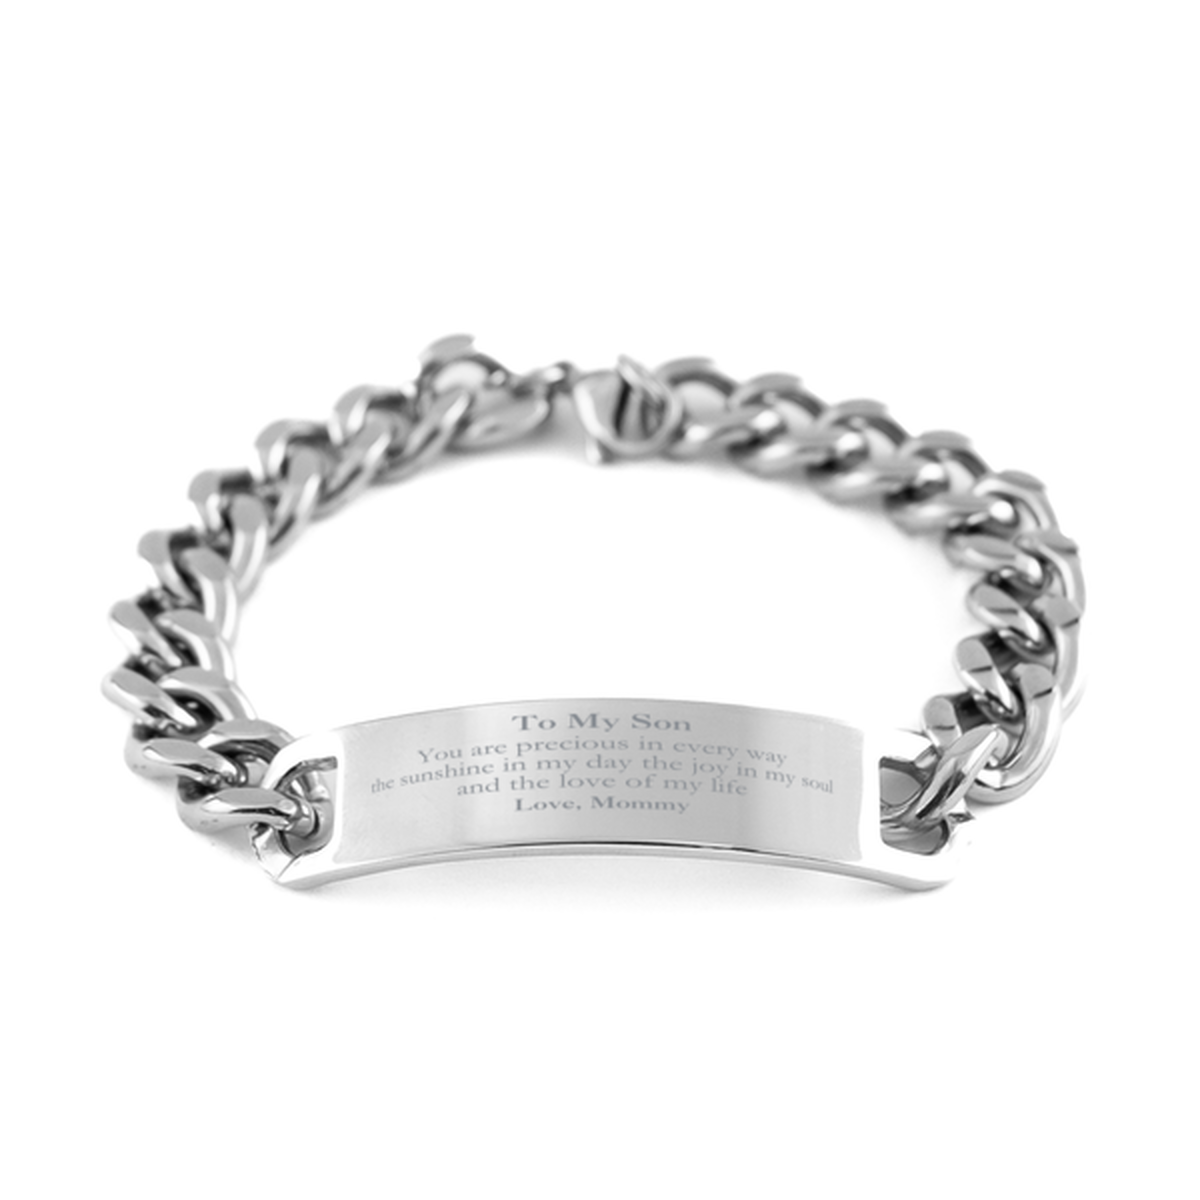 Graduation Gifts for Son Cuban Chain Stainless Steel Bracelet Present from Mommy, Christmas Son Birthday Gifts Son You are precious in every way the sunshine in my day. Love, Mommy